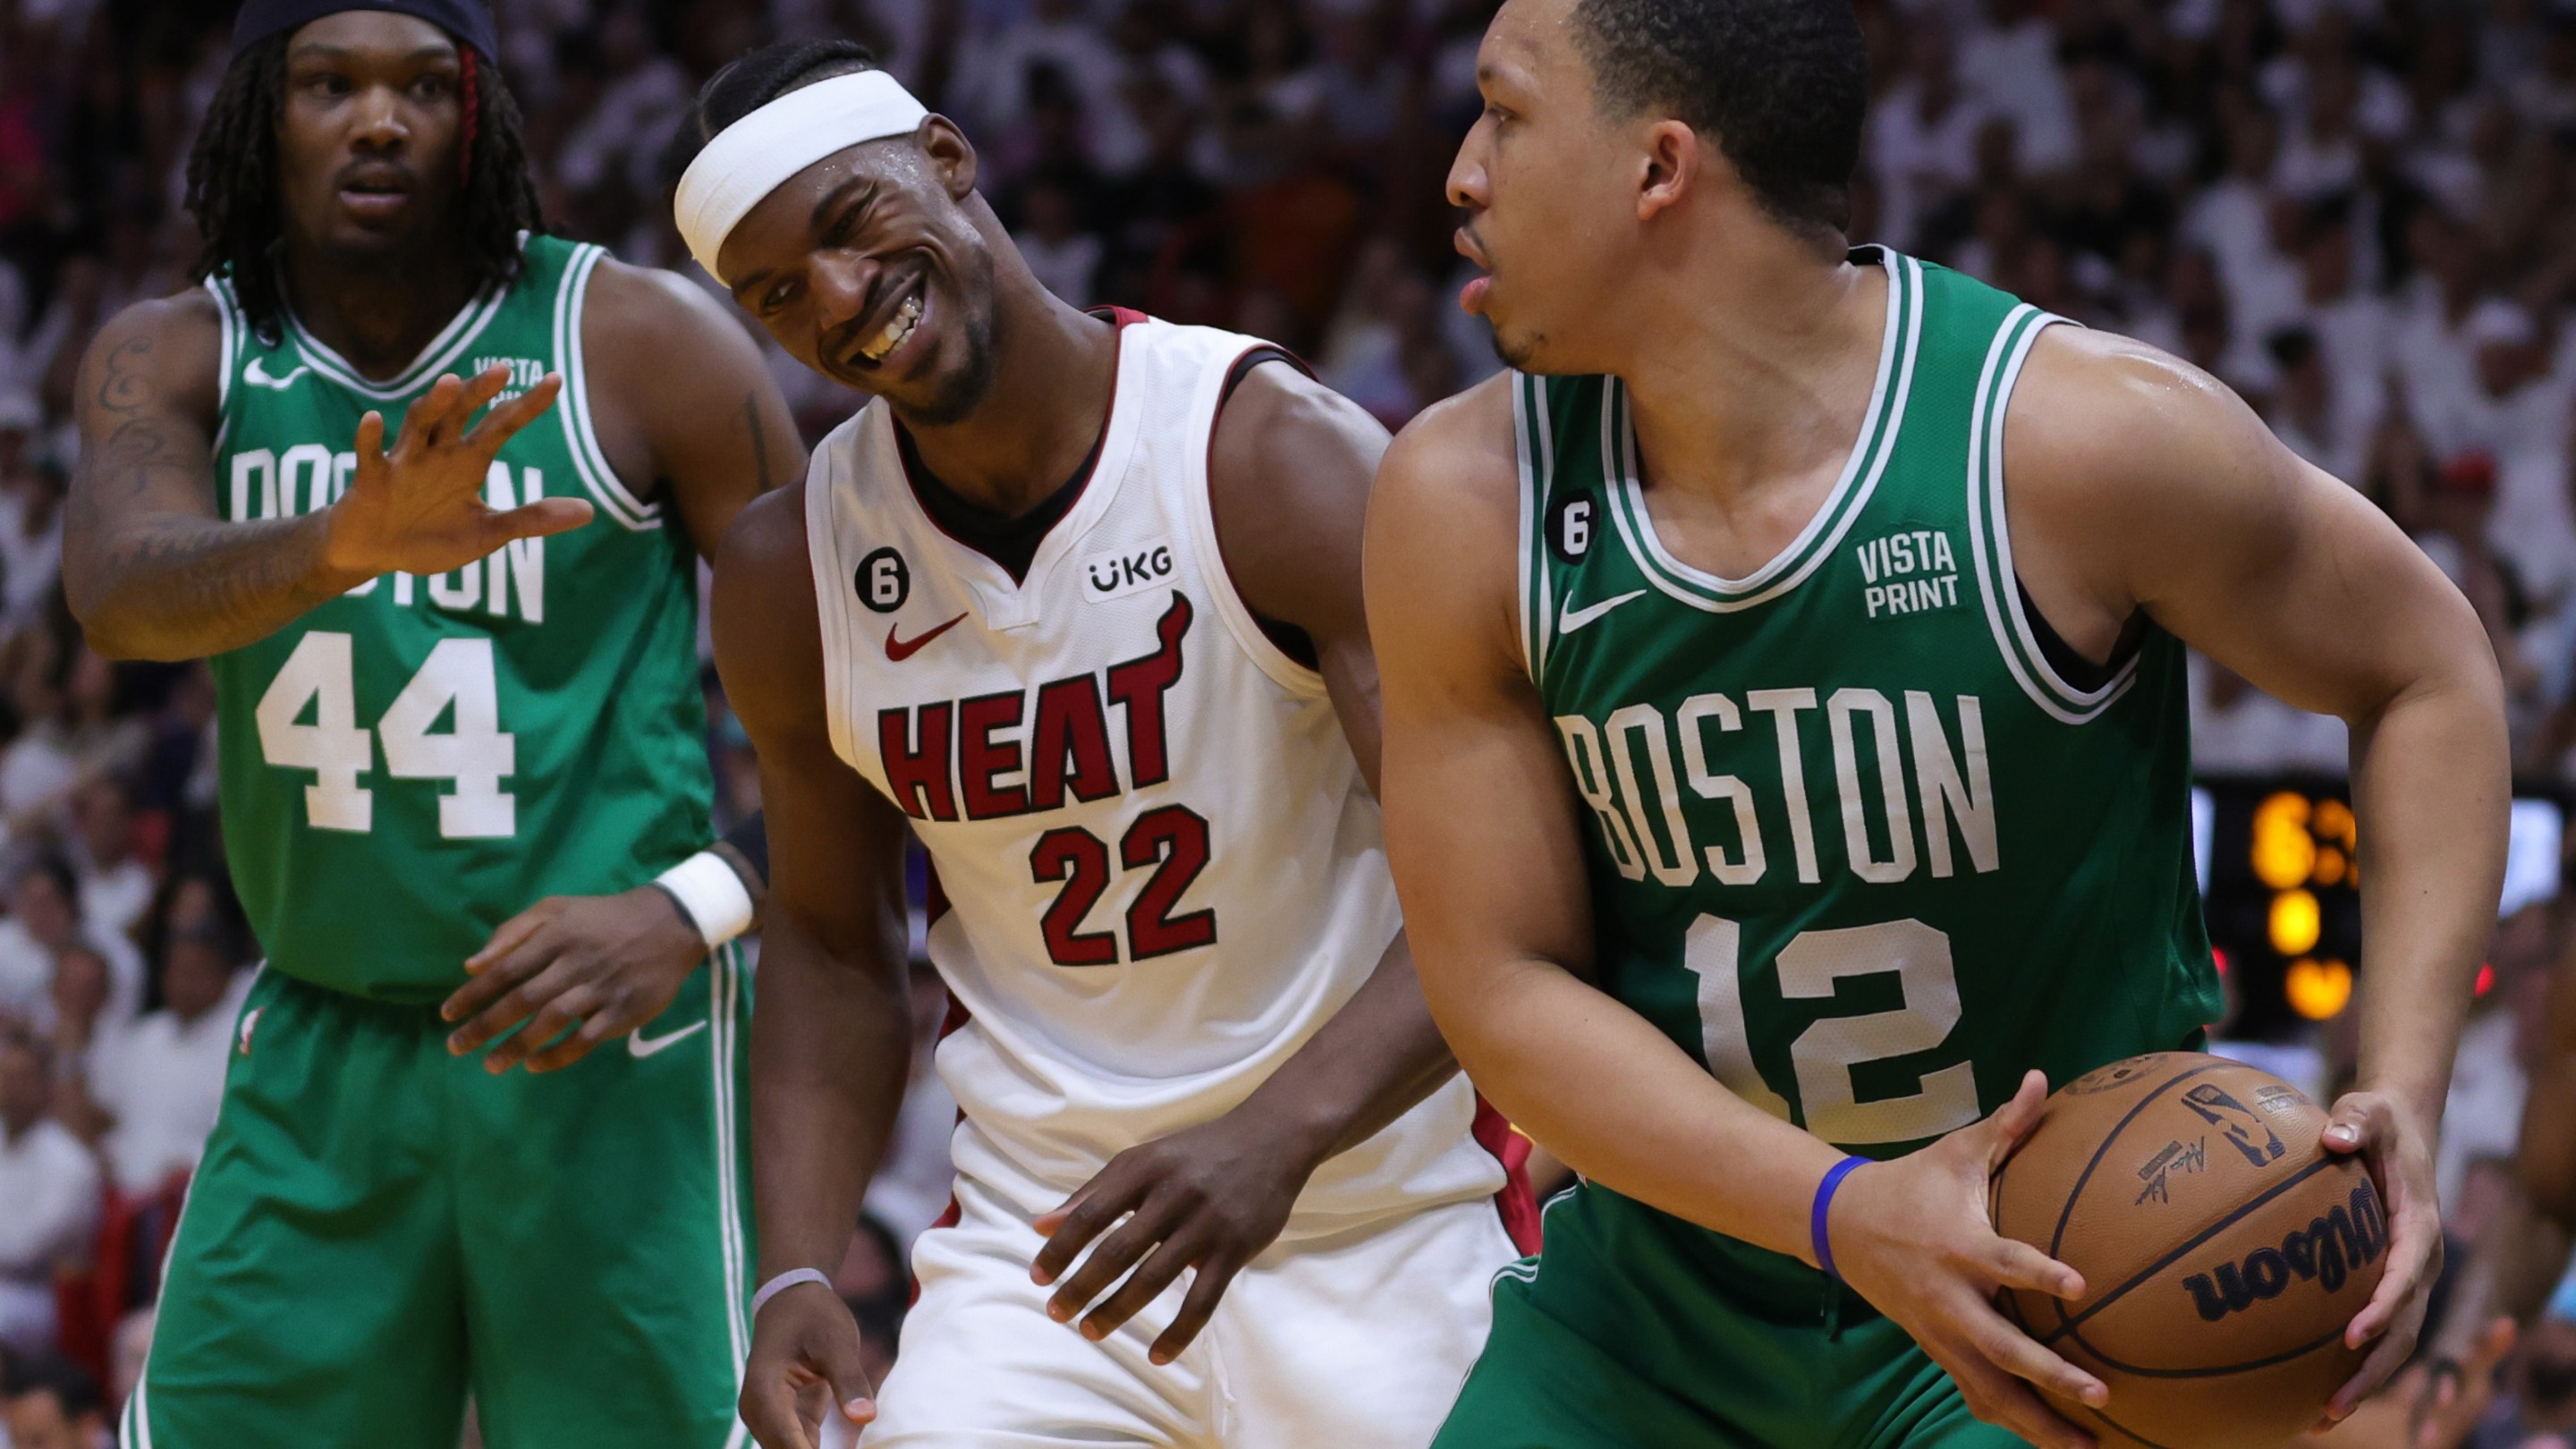 MIAMI, FLORIDA - MAY 23: Grant Williams #12 of the Boston Celtics controls the ball ahead of Jimmy Butler #22 of the Miami Heat during the fourth quarter in game four of the Eastern Conference Finals at Kaseya Center on May 23, 2023 in Miami, Florida. NOTE TO USER: User expressly acknowledges and agrees that, by downloading and or using this photograph, User is consenting to the terms and conditions of the Getty Images License Agreement. (Photo by Megan Briggs/Getty Images)